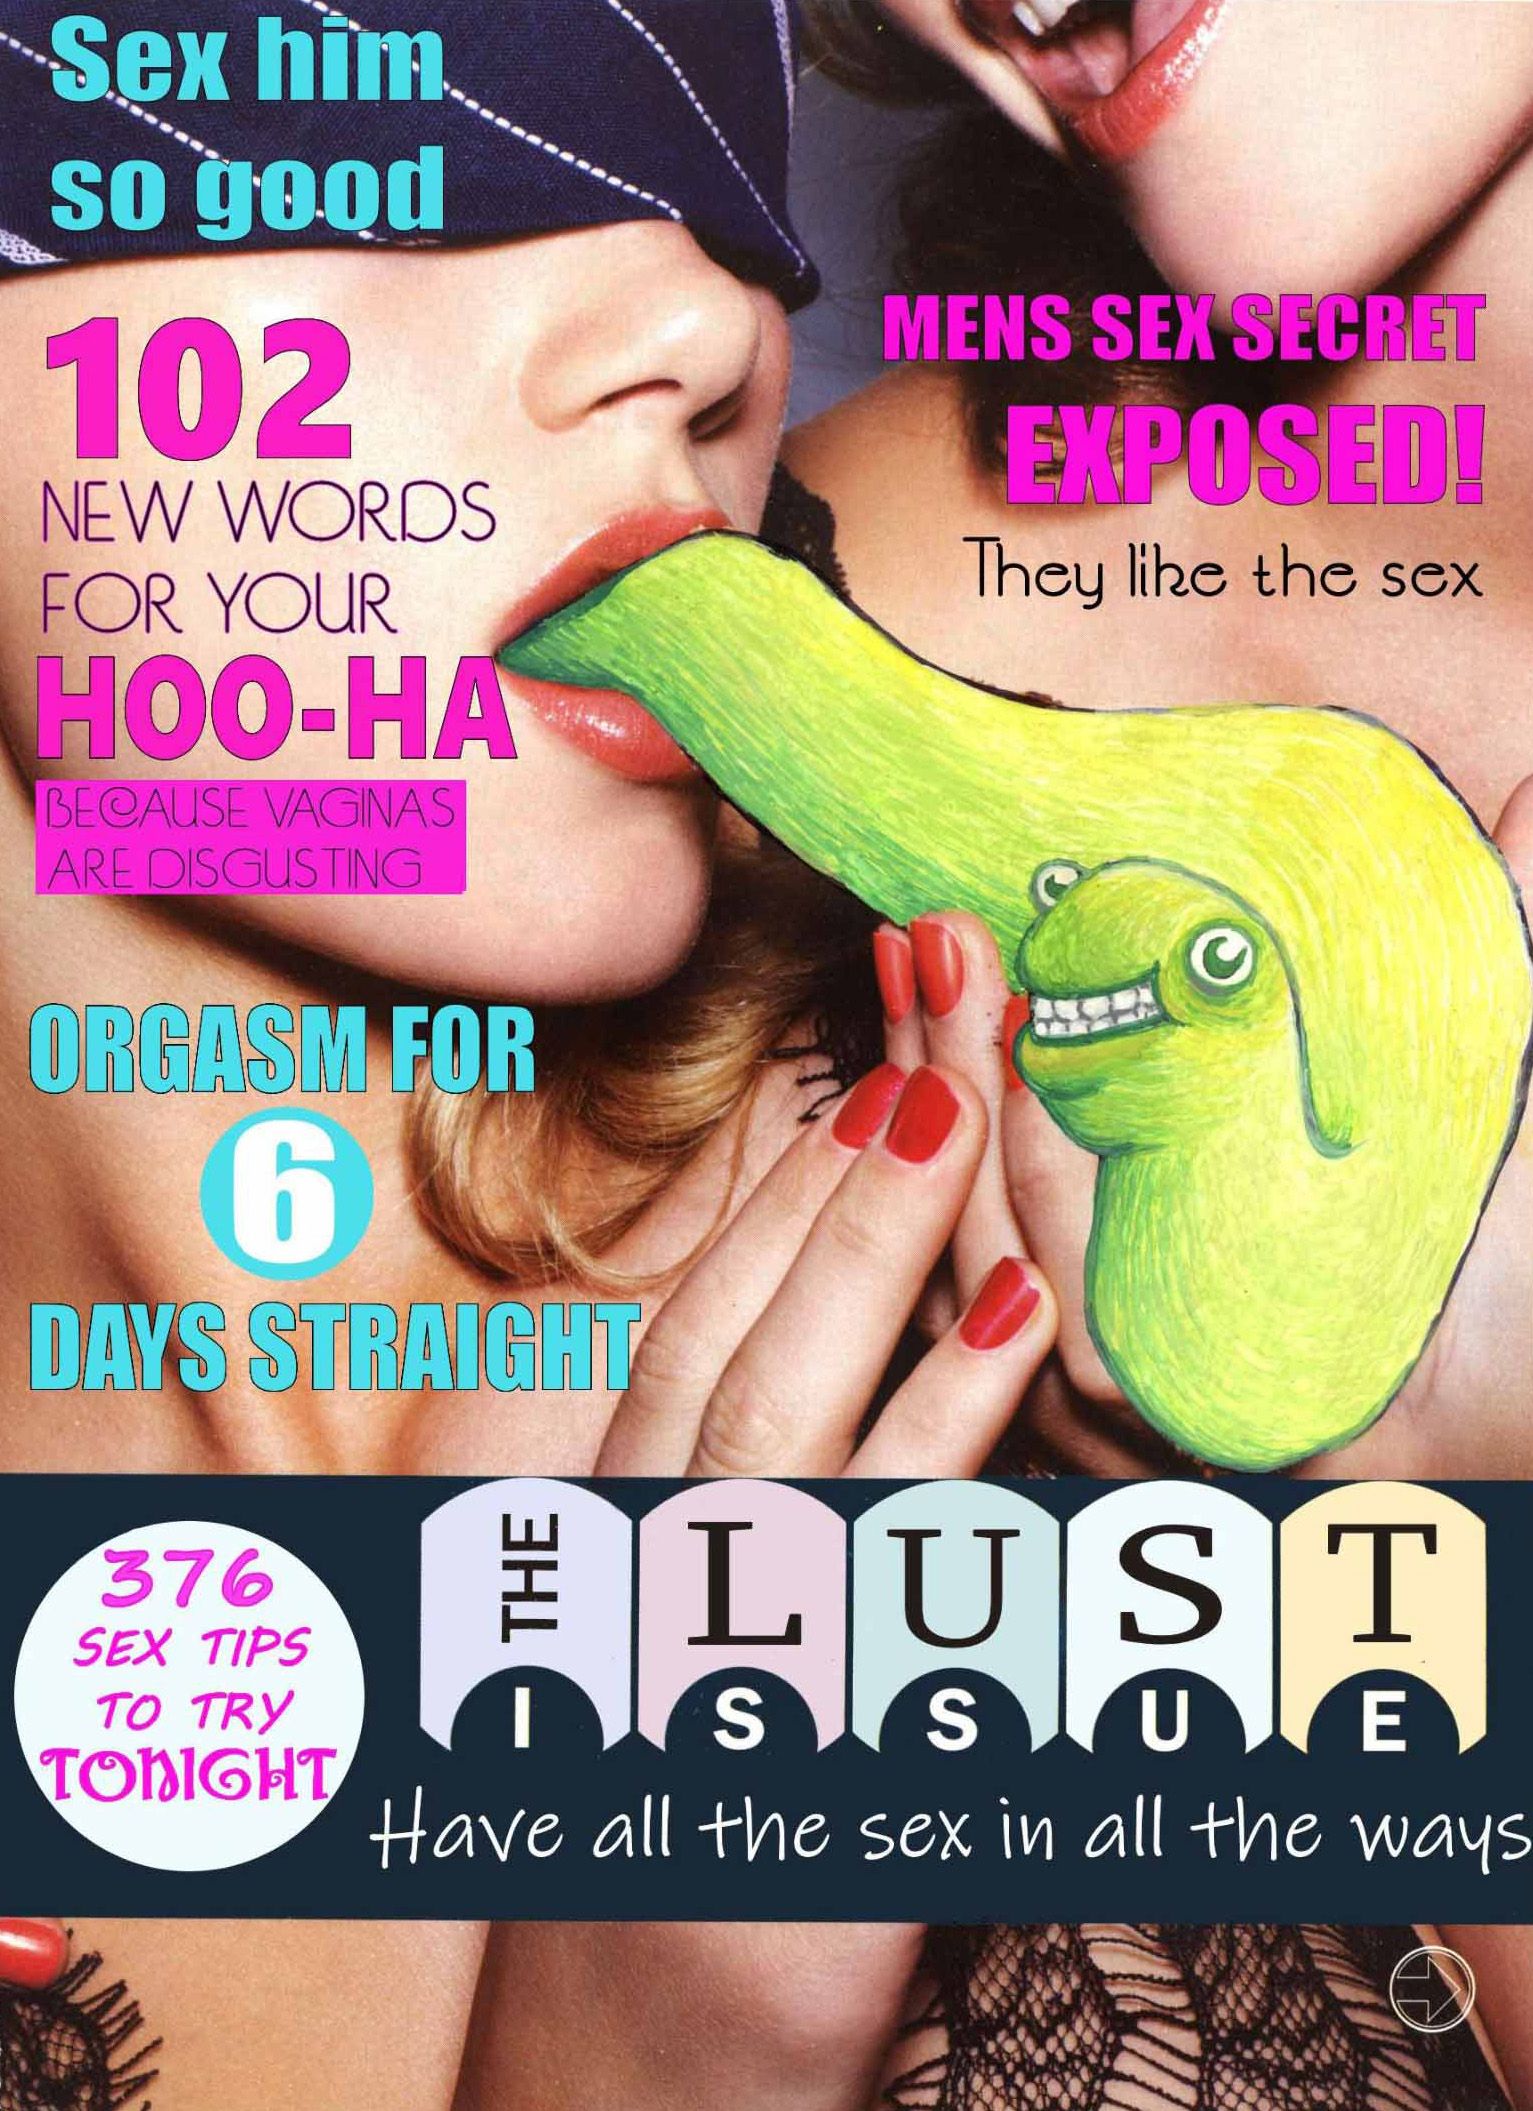 The Lust Issue